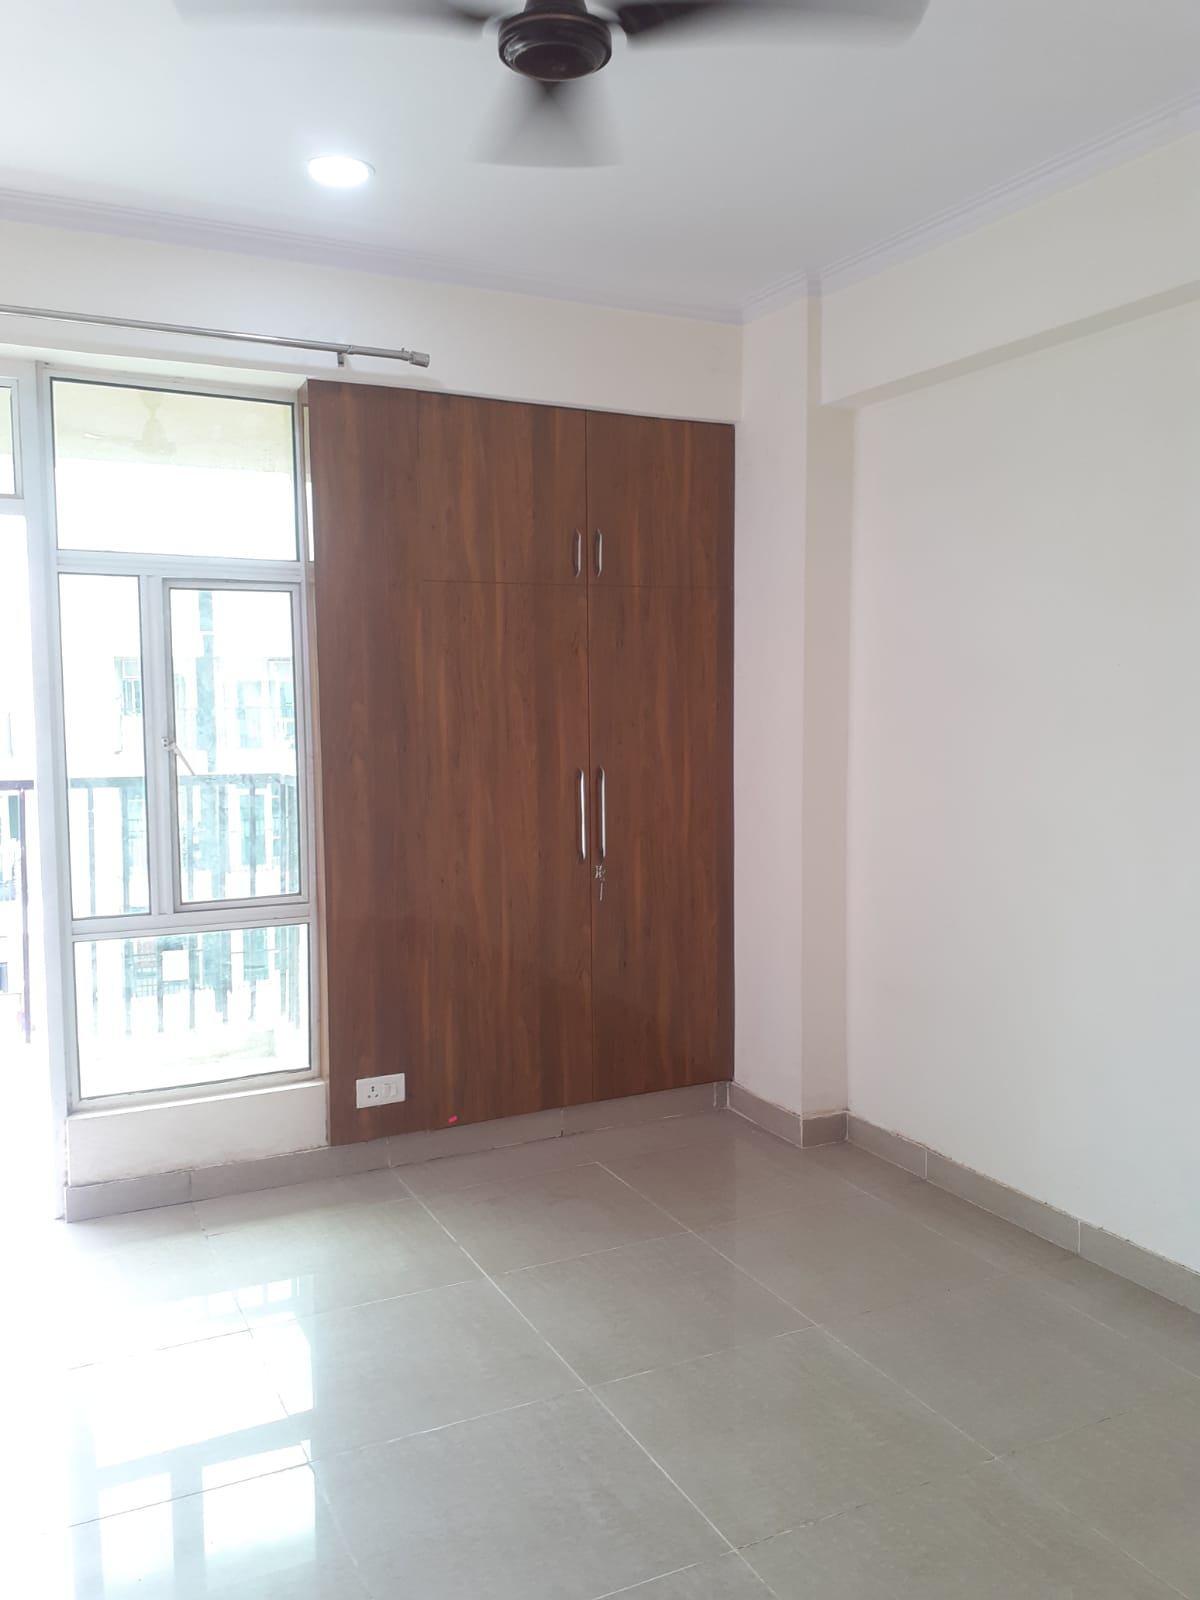 4 Bed/ 3 Bath Sell Apartment/ Flat; 1,880 sq. ft. carpet area; Ready To Move for sale @Noida Extension 